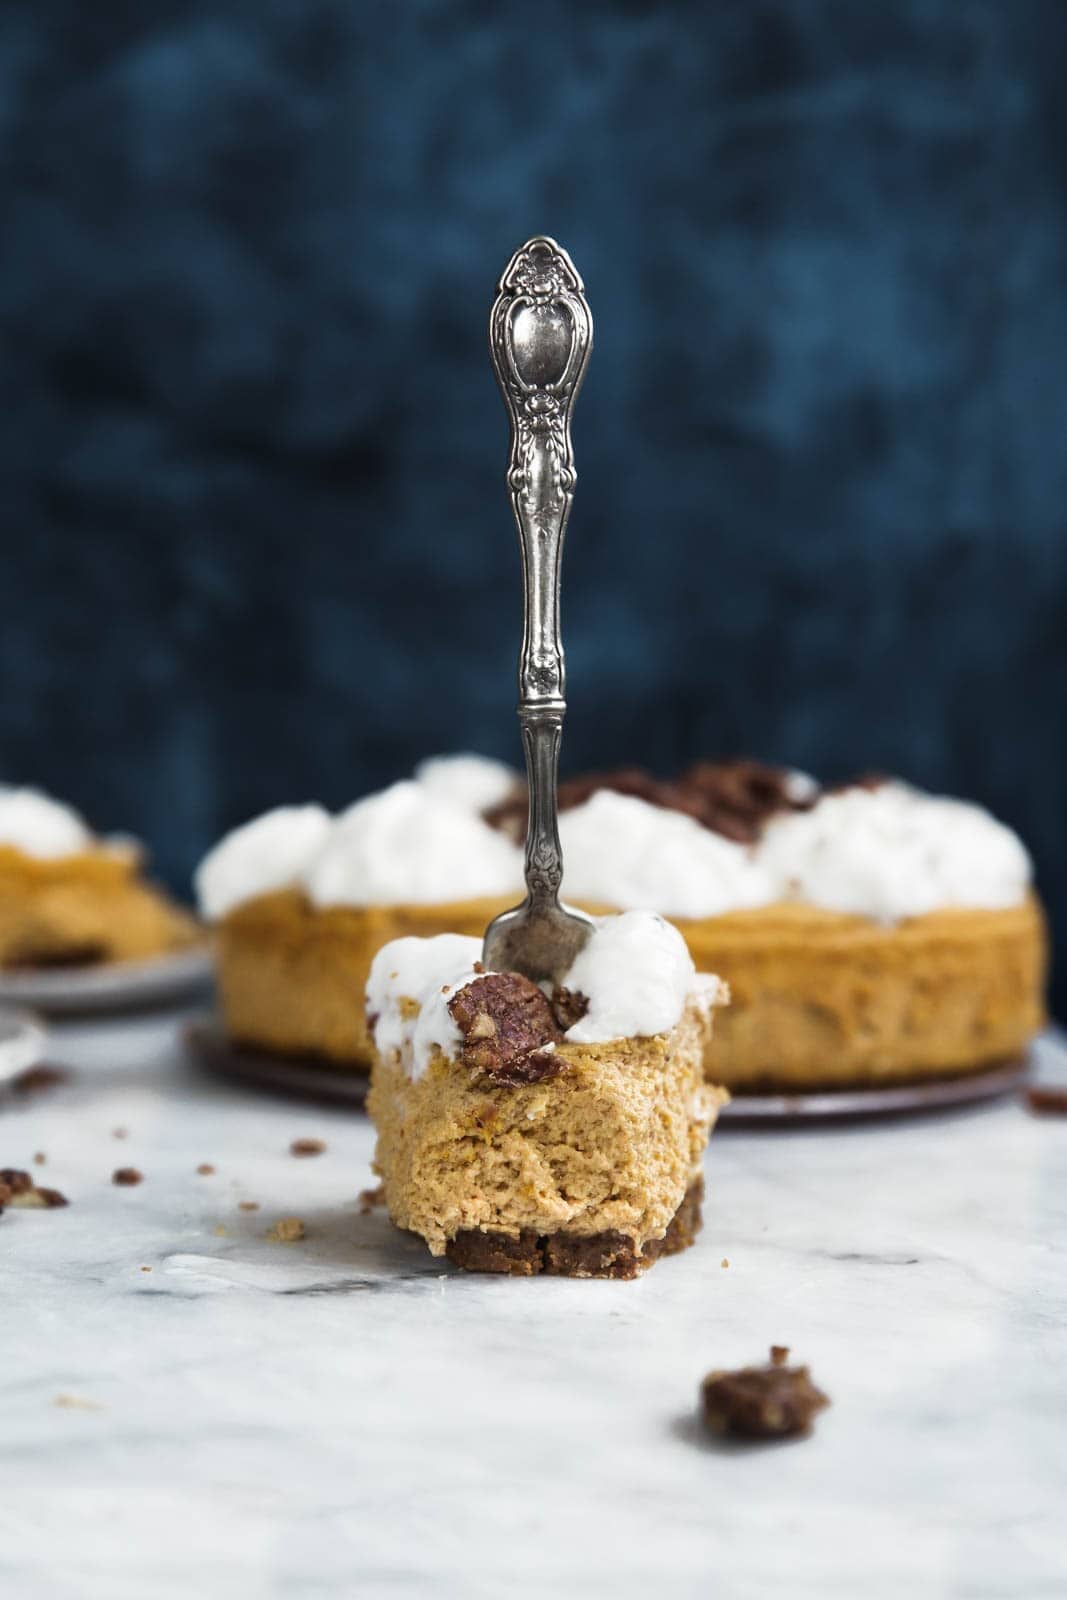 If pumpkin mousse and cheesecake had a lovechild it would be this fluffy cheesecake, sandwiched between a gingersnap crust and pumpkin pie spice candied pecans.